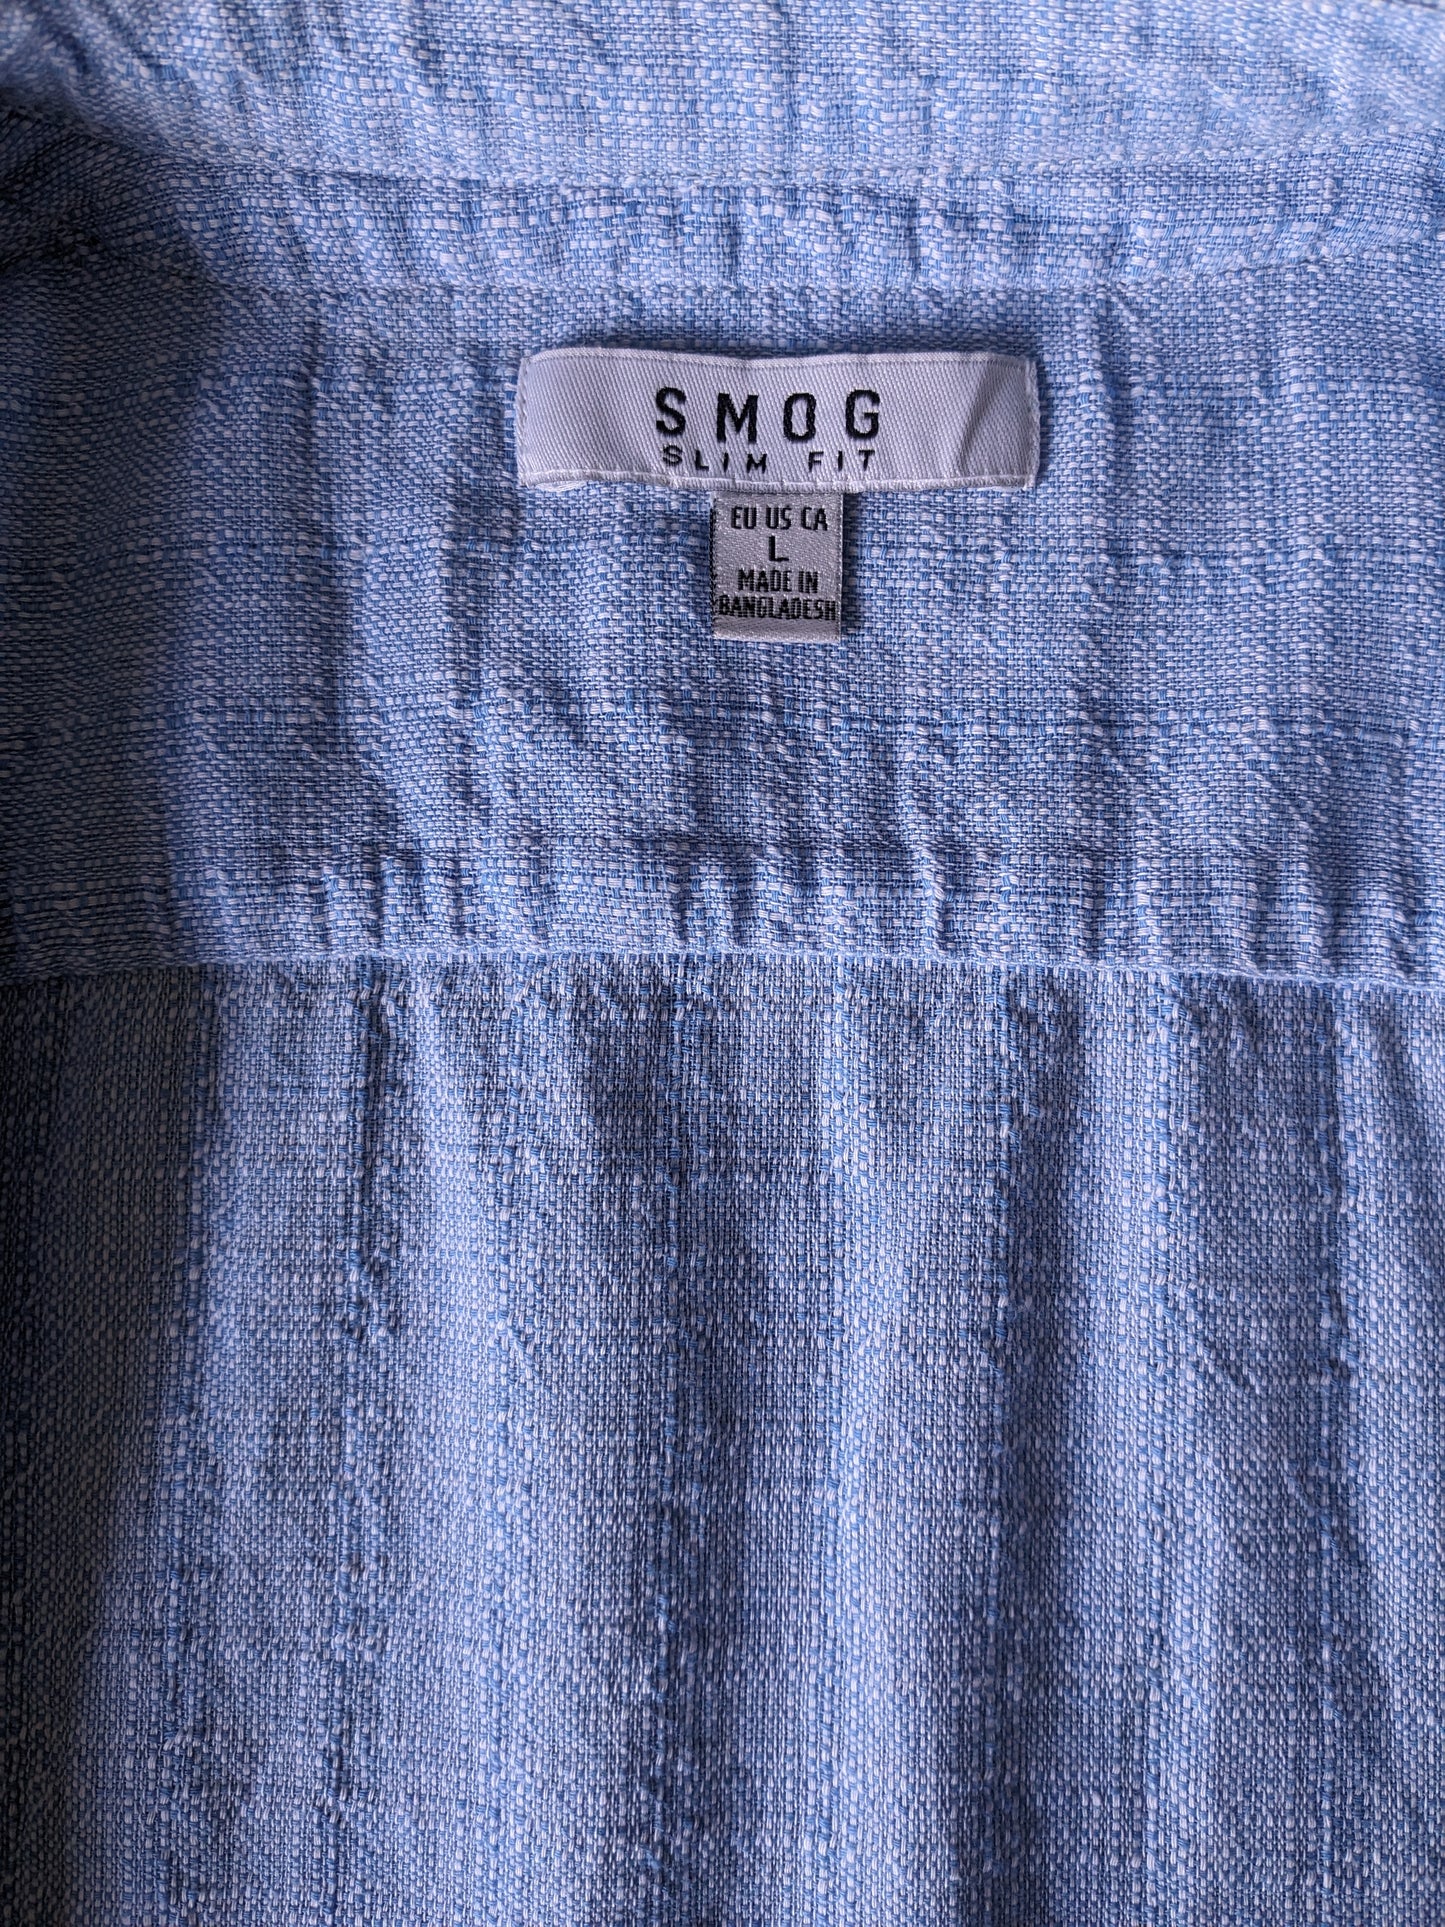 Smog shirt with mao / farmers / upright collar. Blue mixed. Size L. Slim Fit.